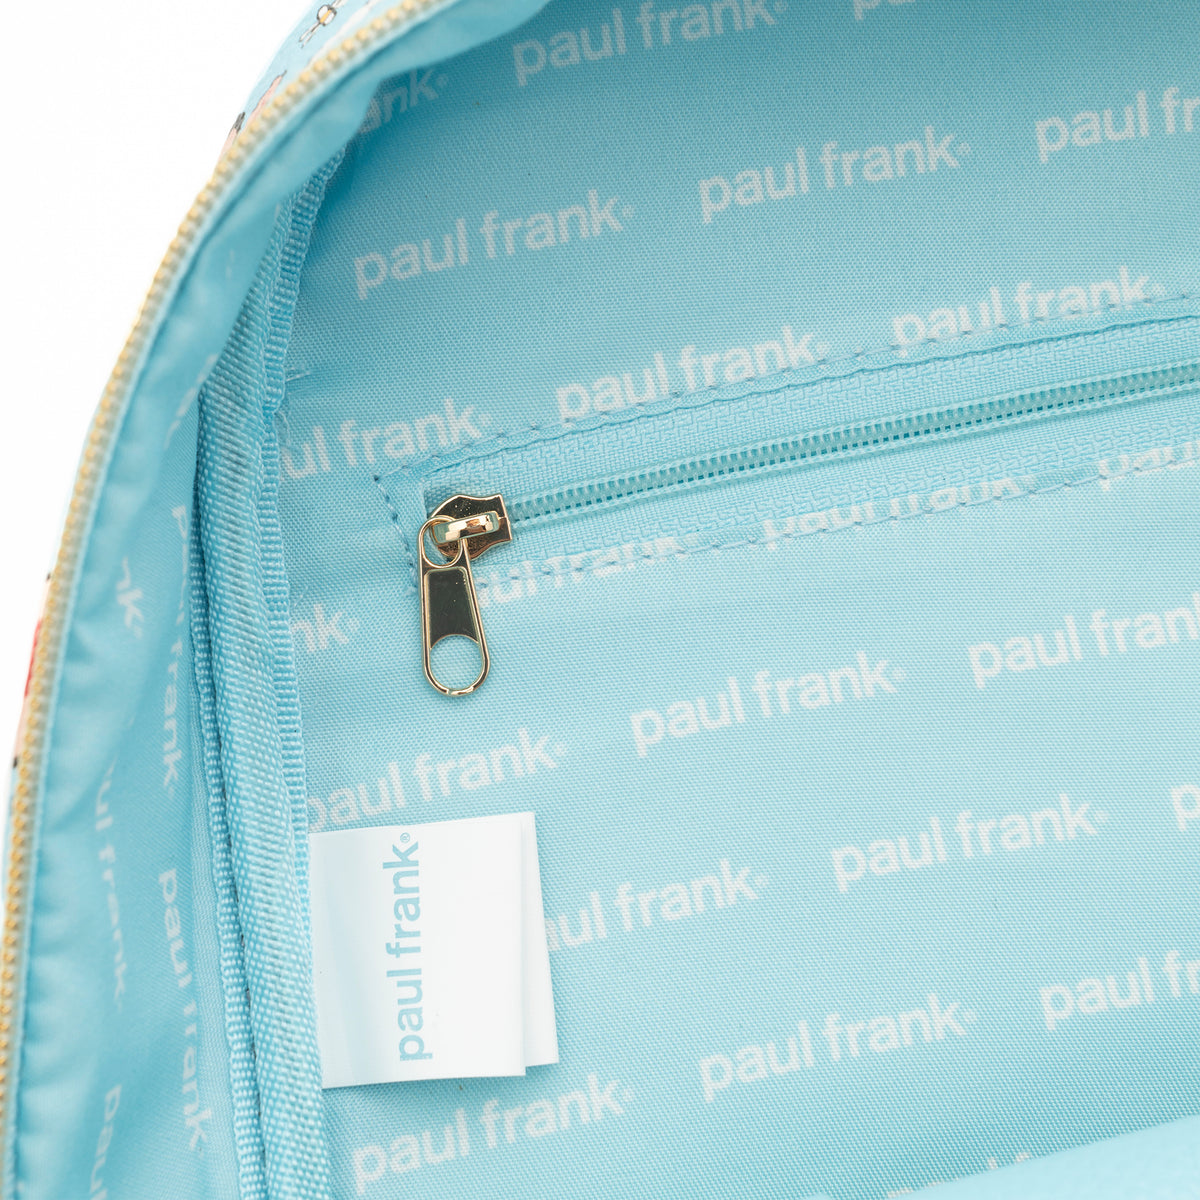 Paul Frank Mini Backpack - Limited Edition